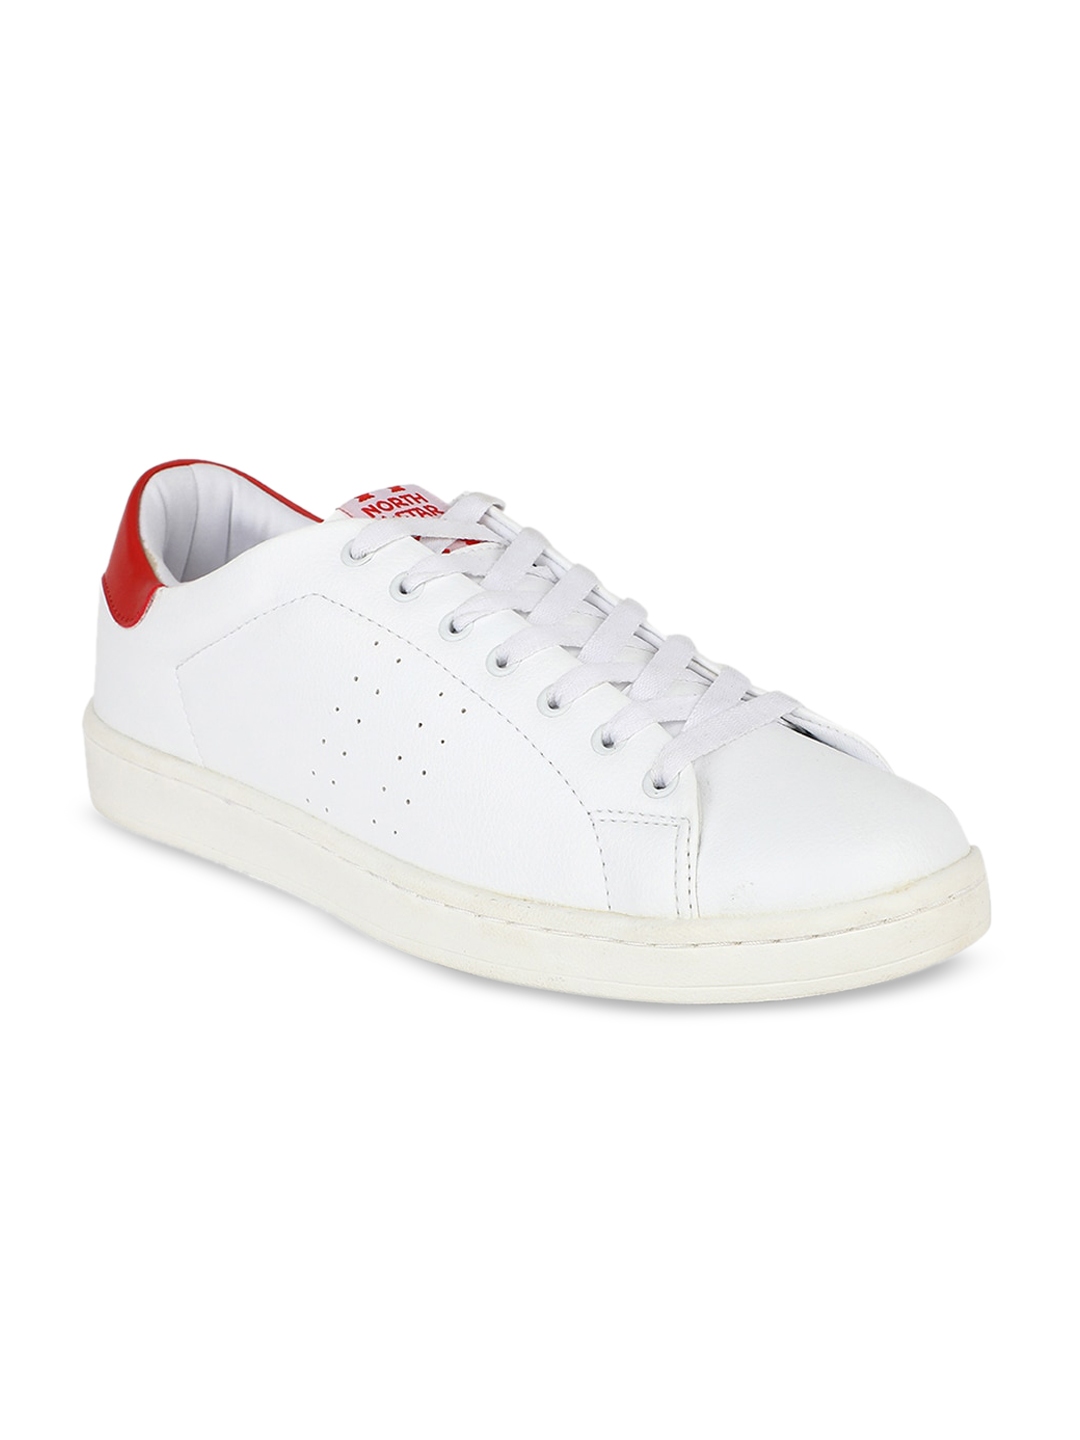 Buy North Star Men White & Red Colourblocked Sneakers - Casual Shoes ...